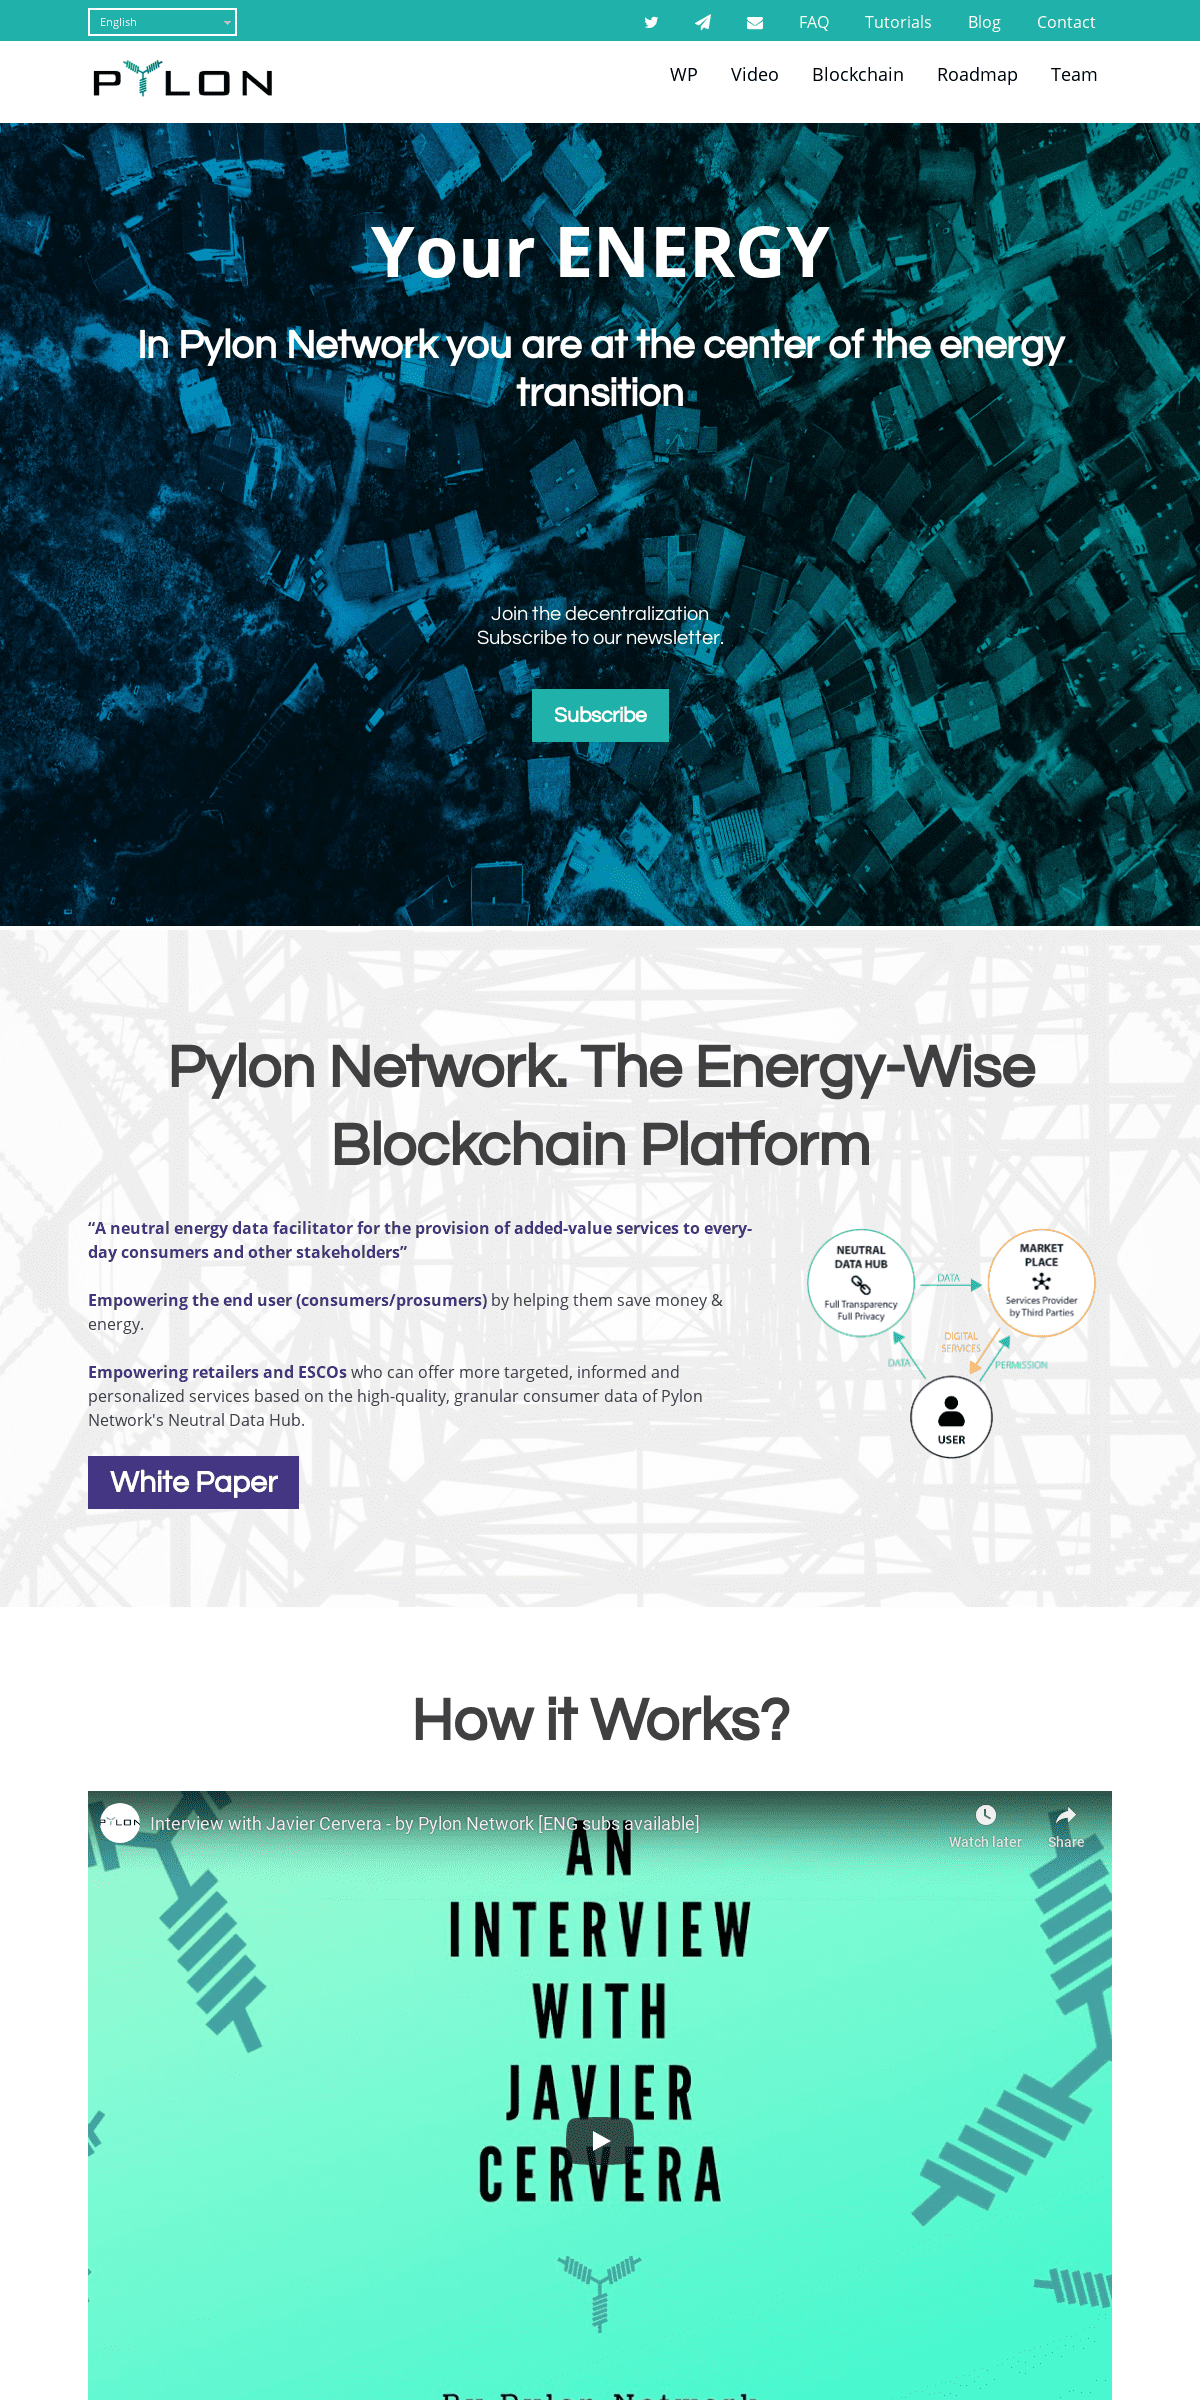 A complete backup of pylon-network.org